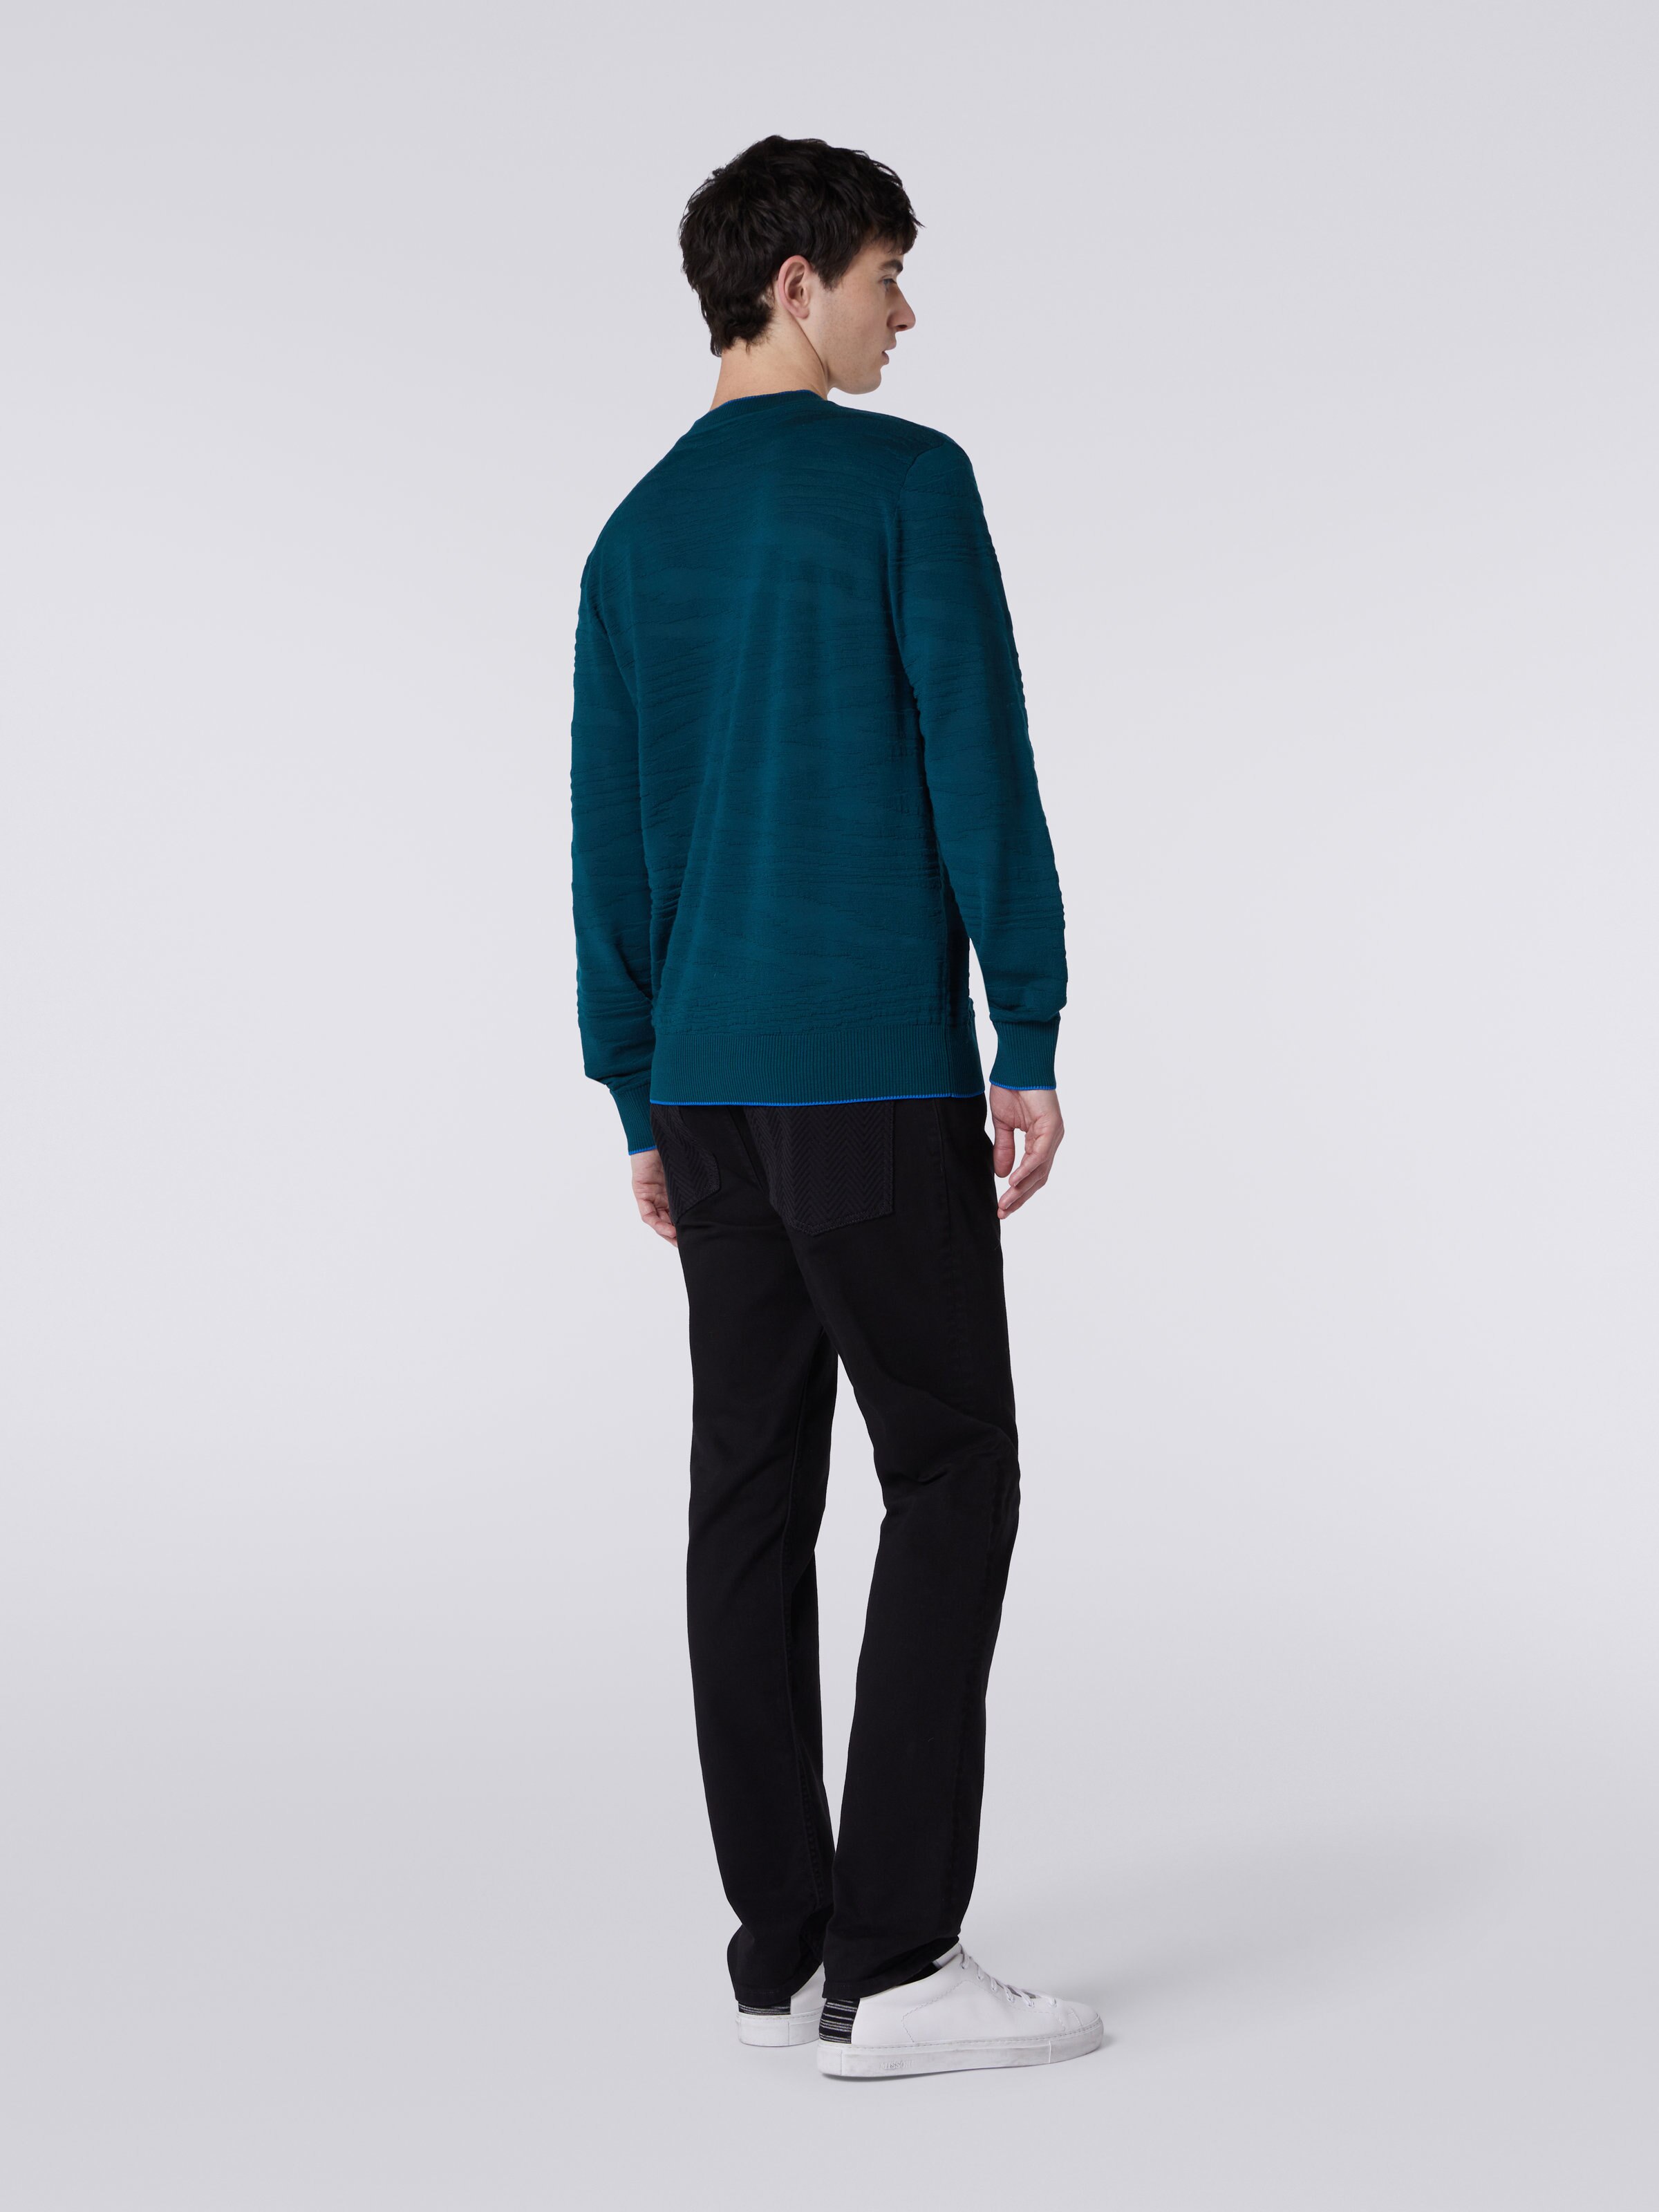 Embossed wool and viscose crew-neck pullover, Green  - 3